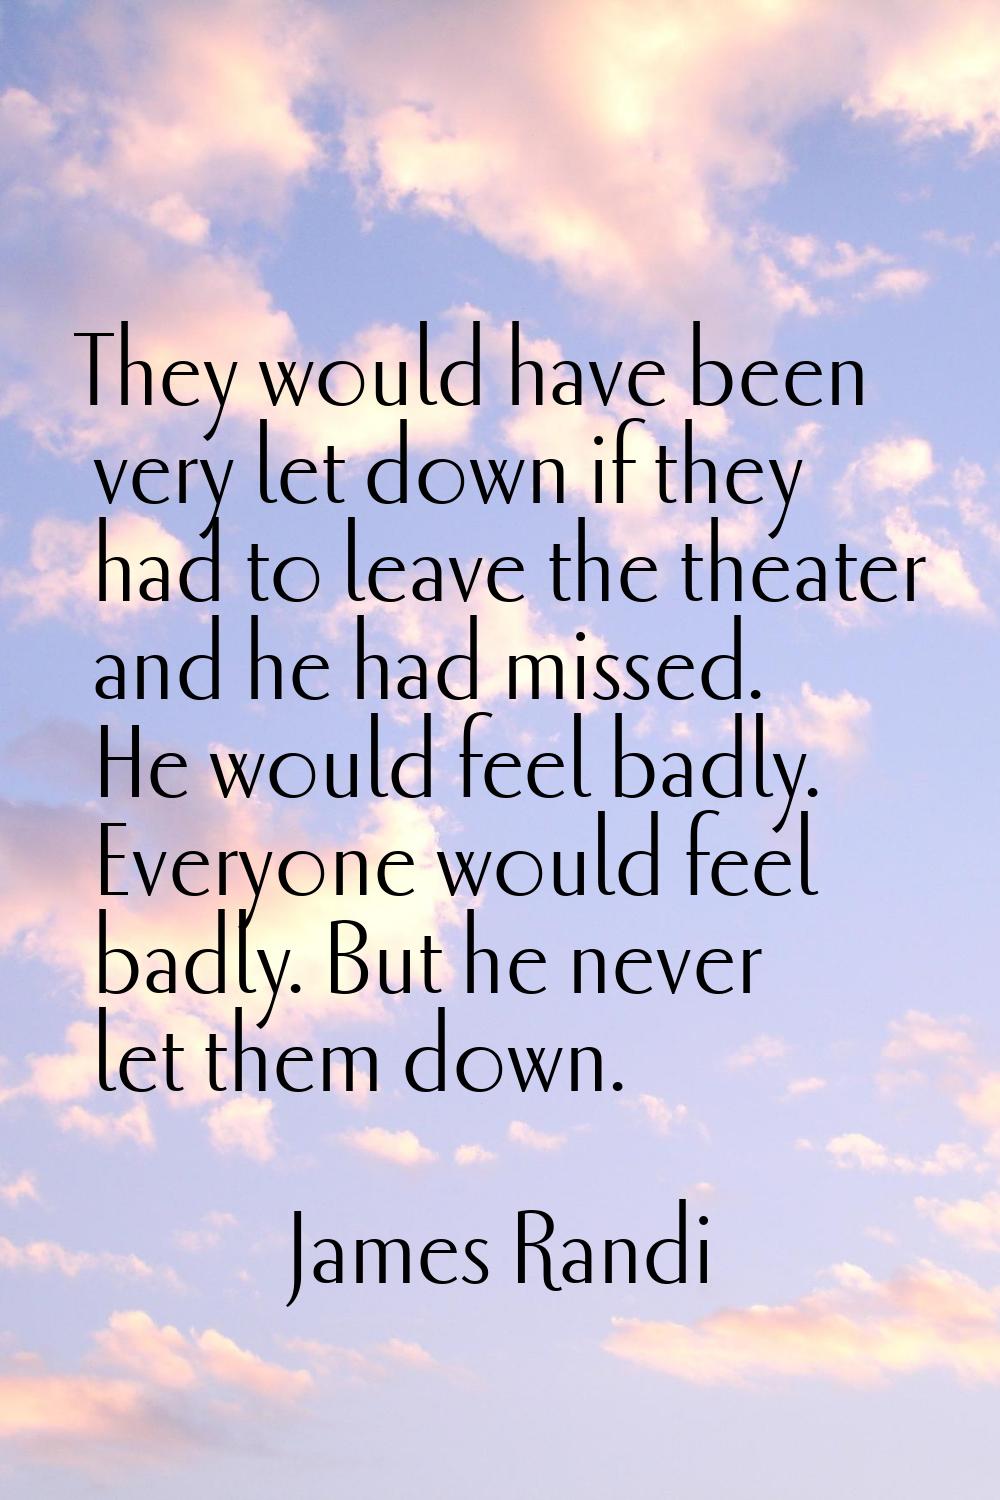 They would have been very let down if they had to leave the theater and he had missed. He would fee